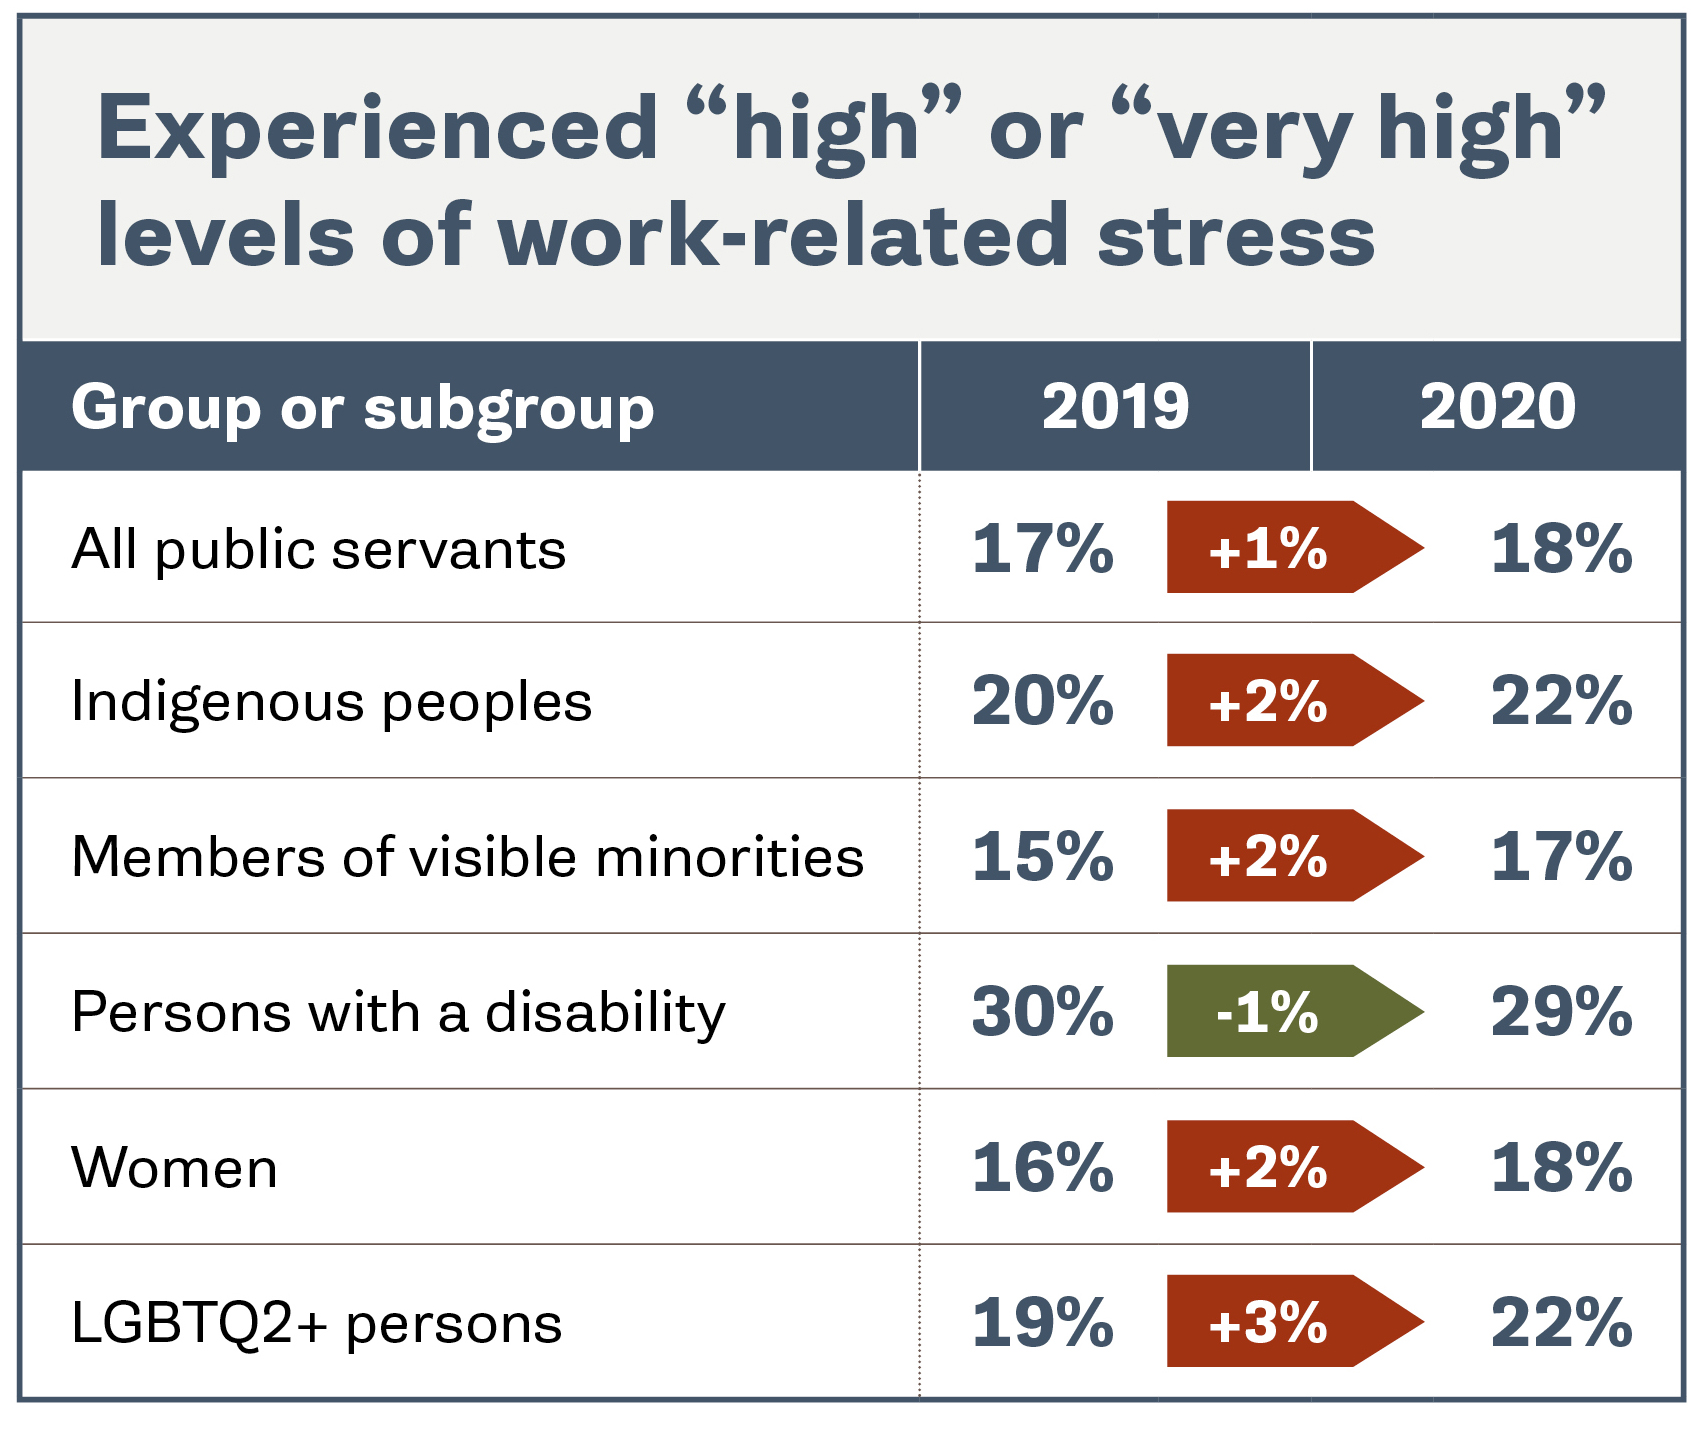 Experienced 'high' or 'very high' levels of work-related stress